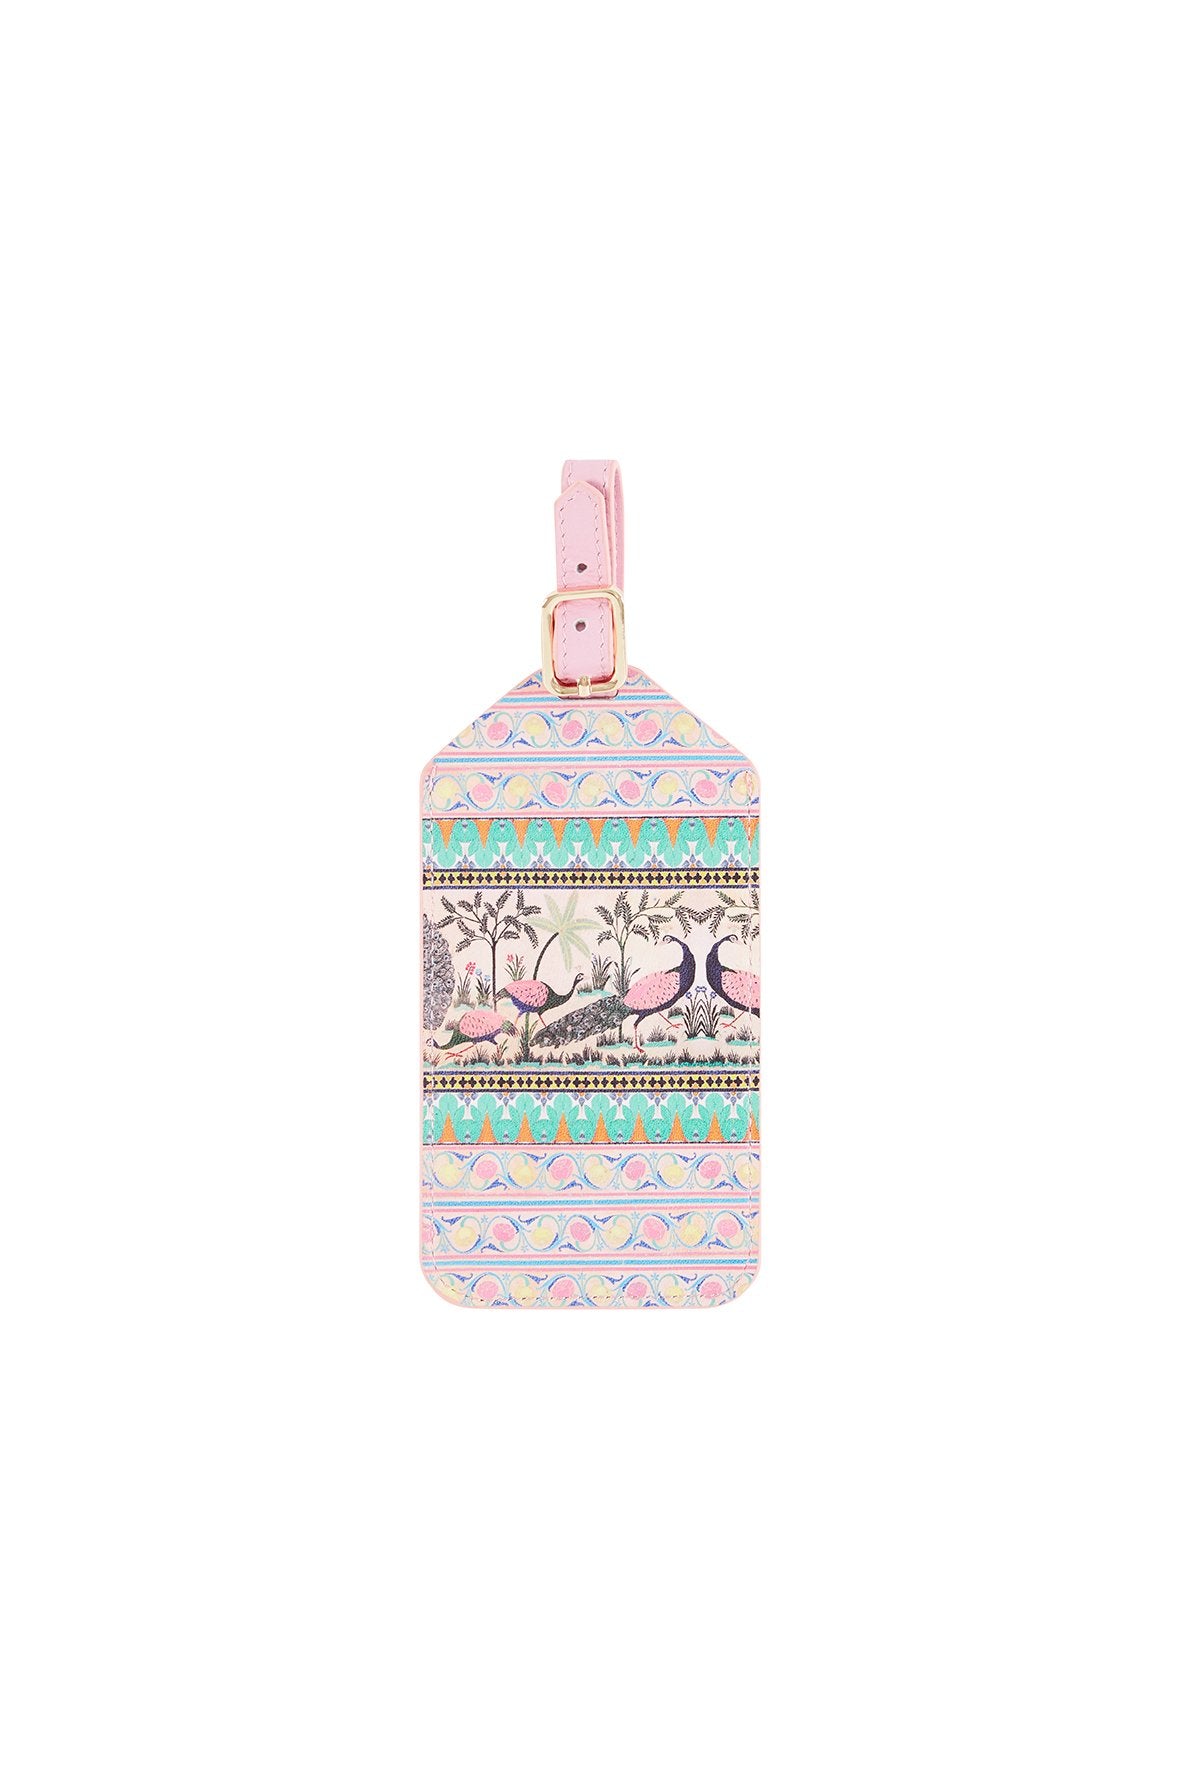 THE KING AND I LUGGAGE TAG